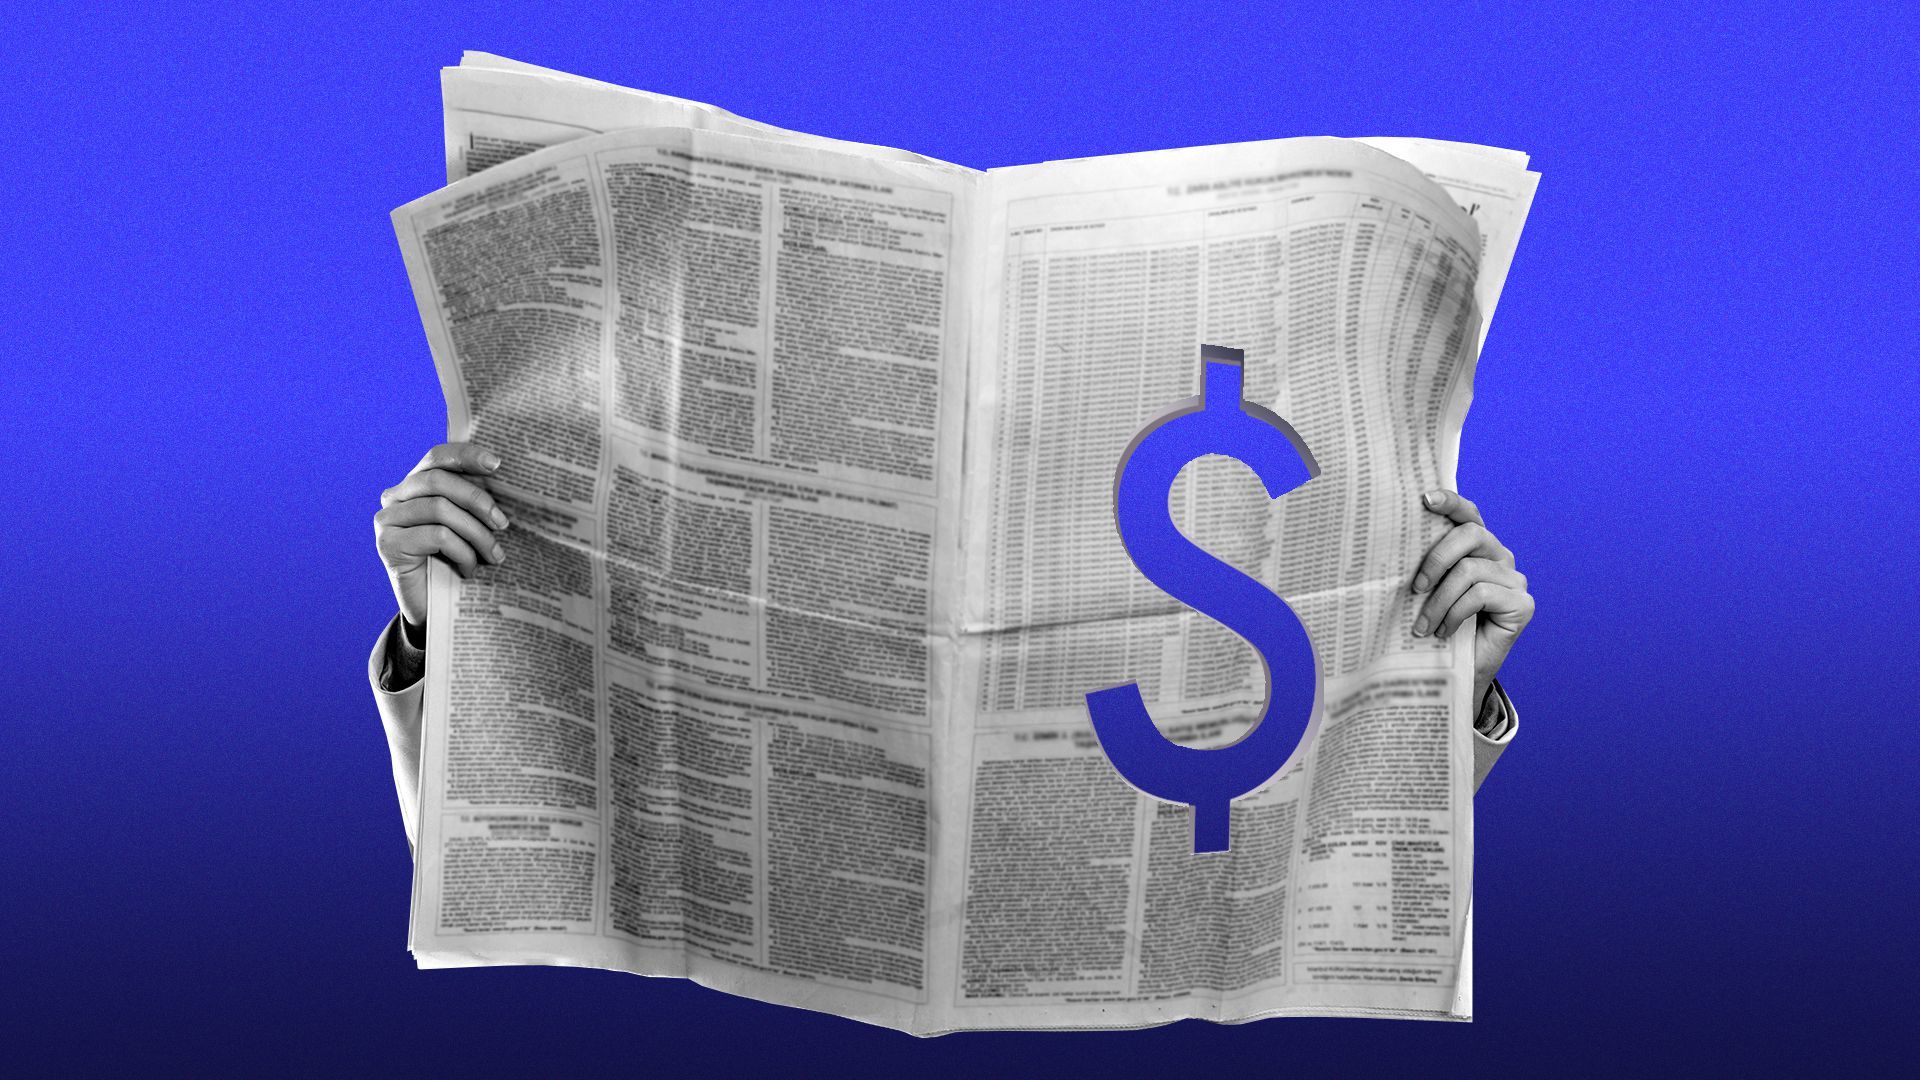 Illustration of an open newspaper with a dollar sign cut out of the pages